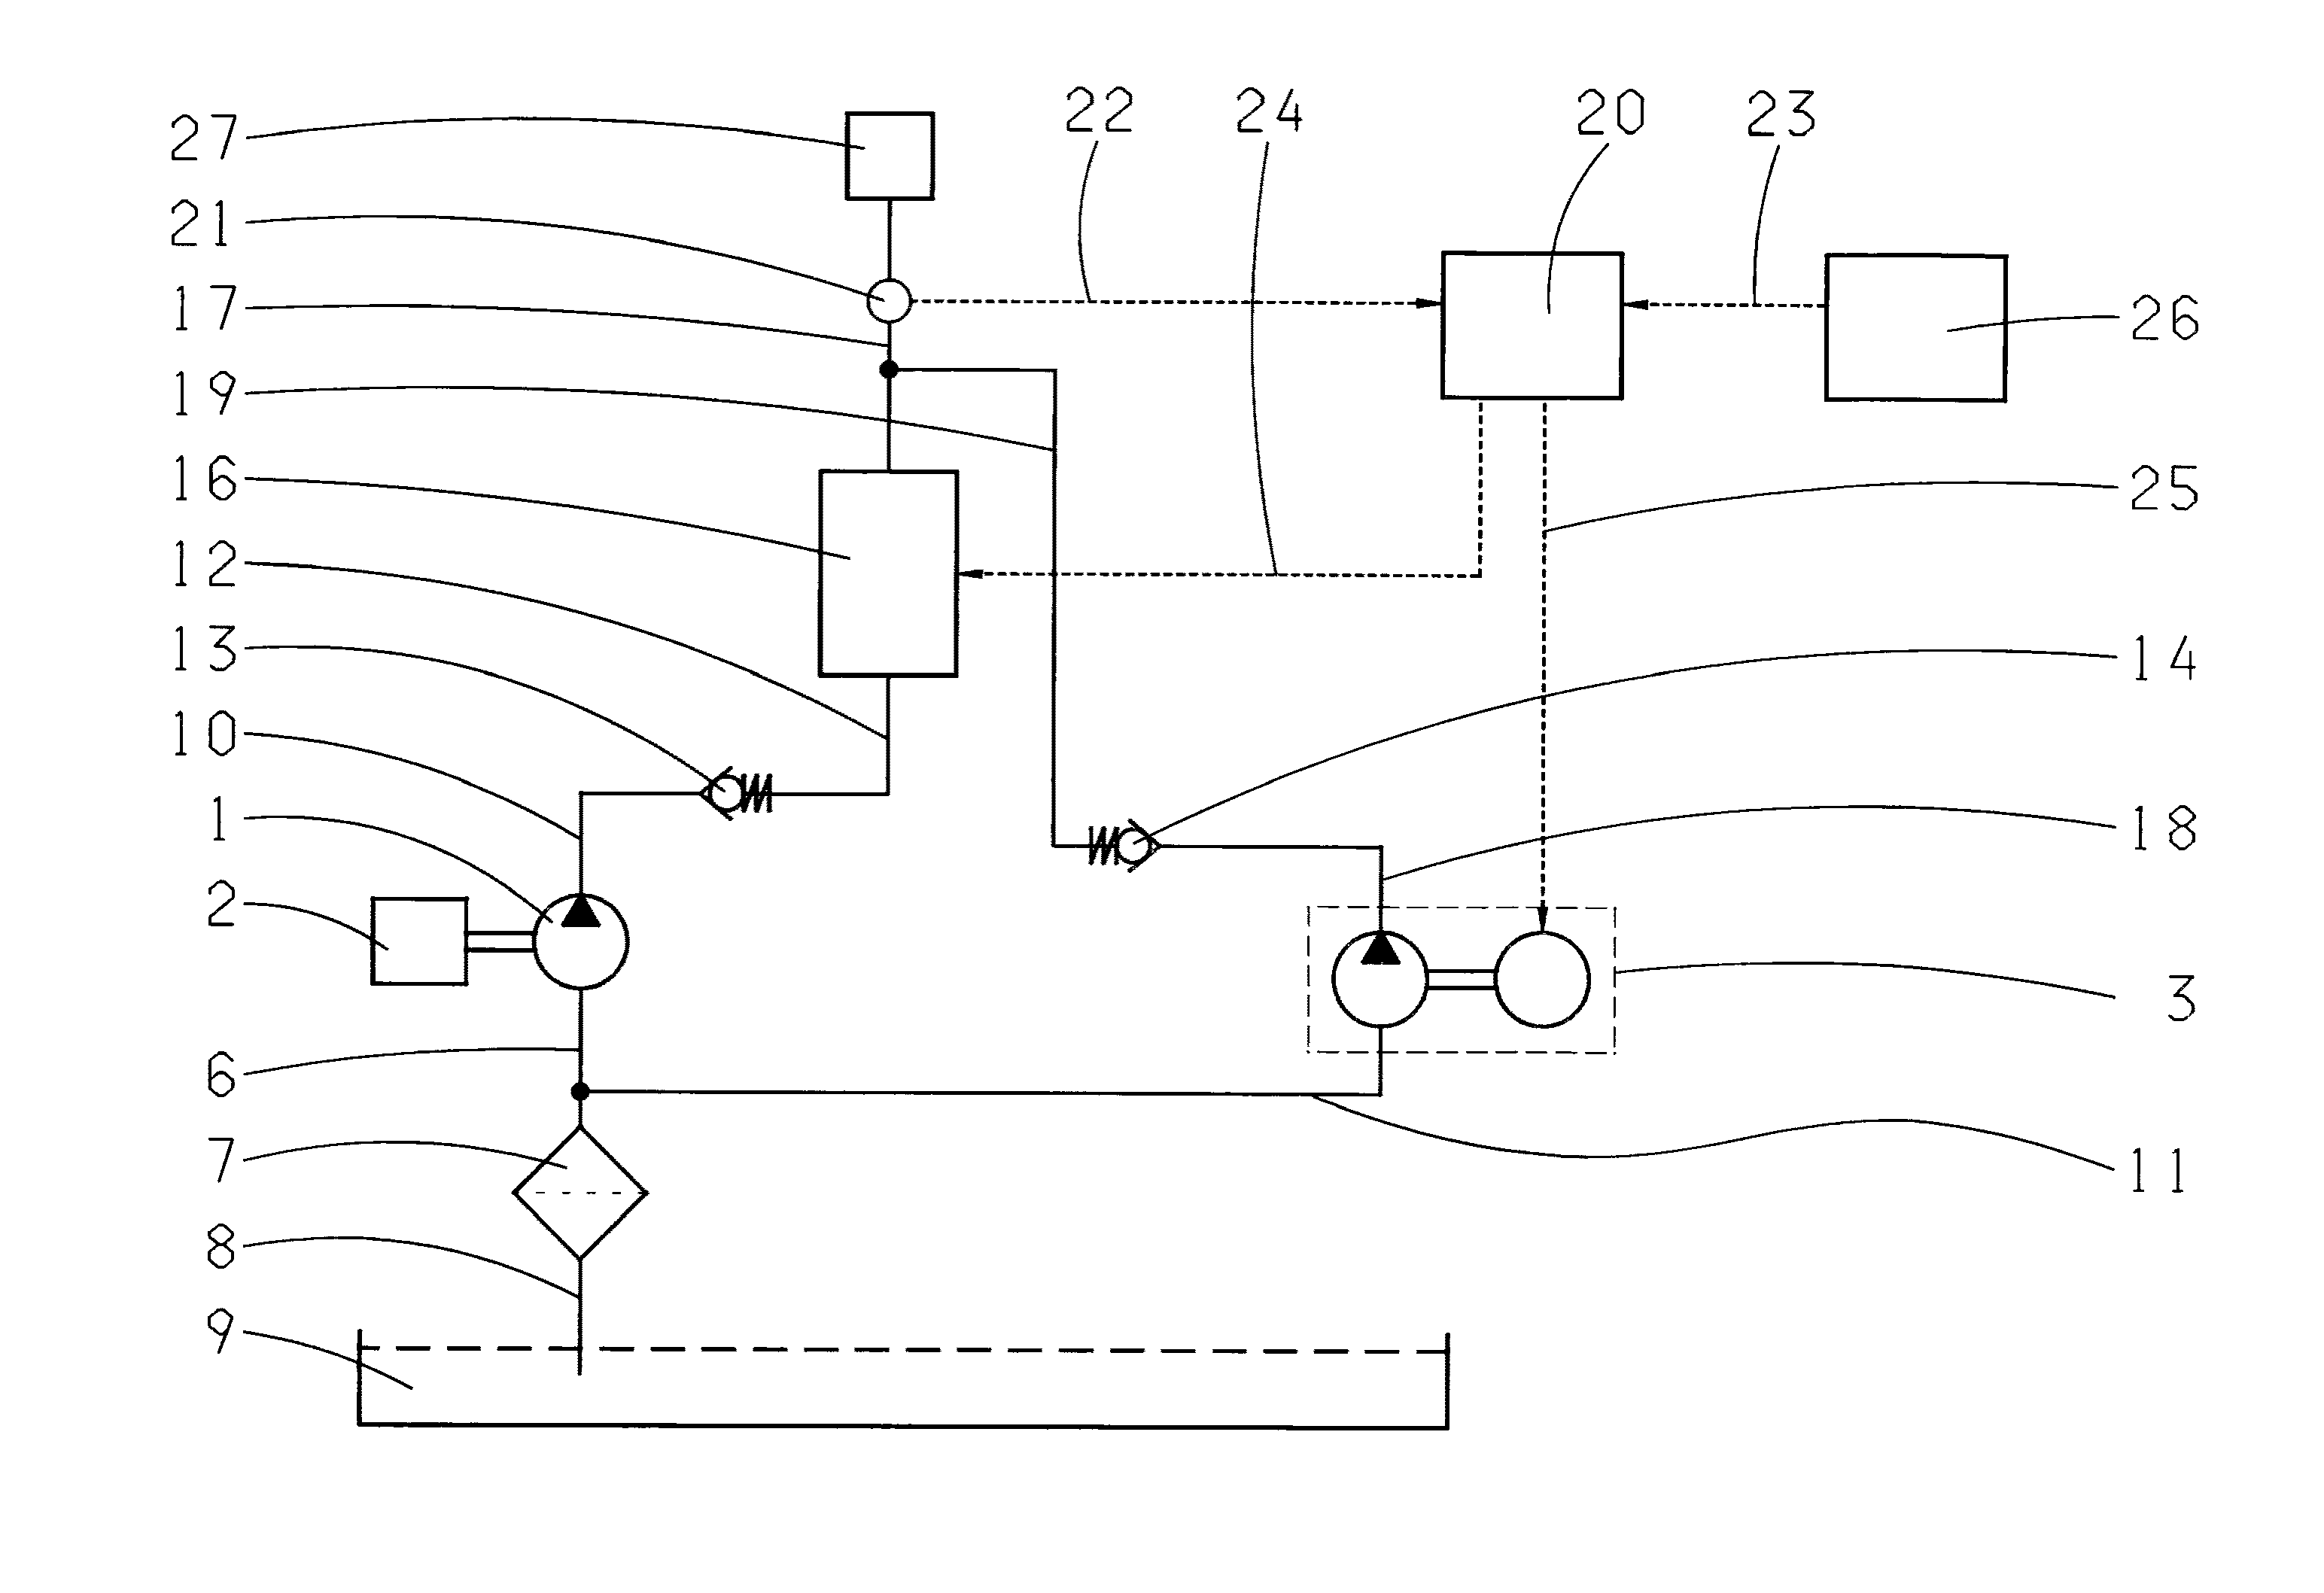 Method of operating an auxiliary electric pump